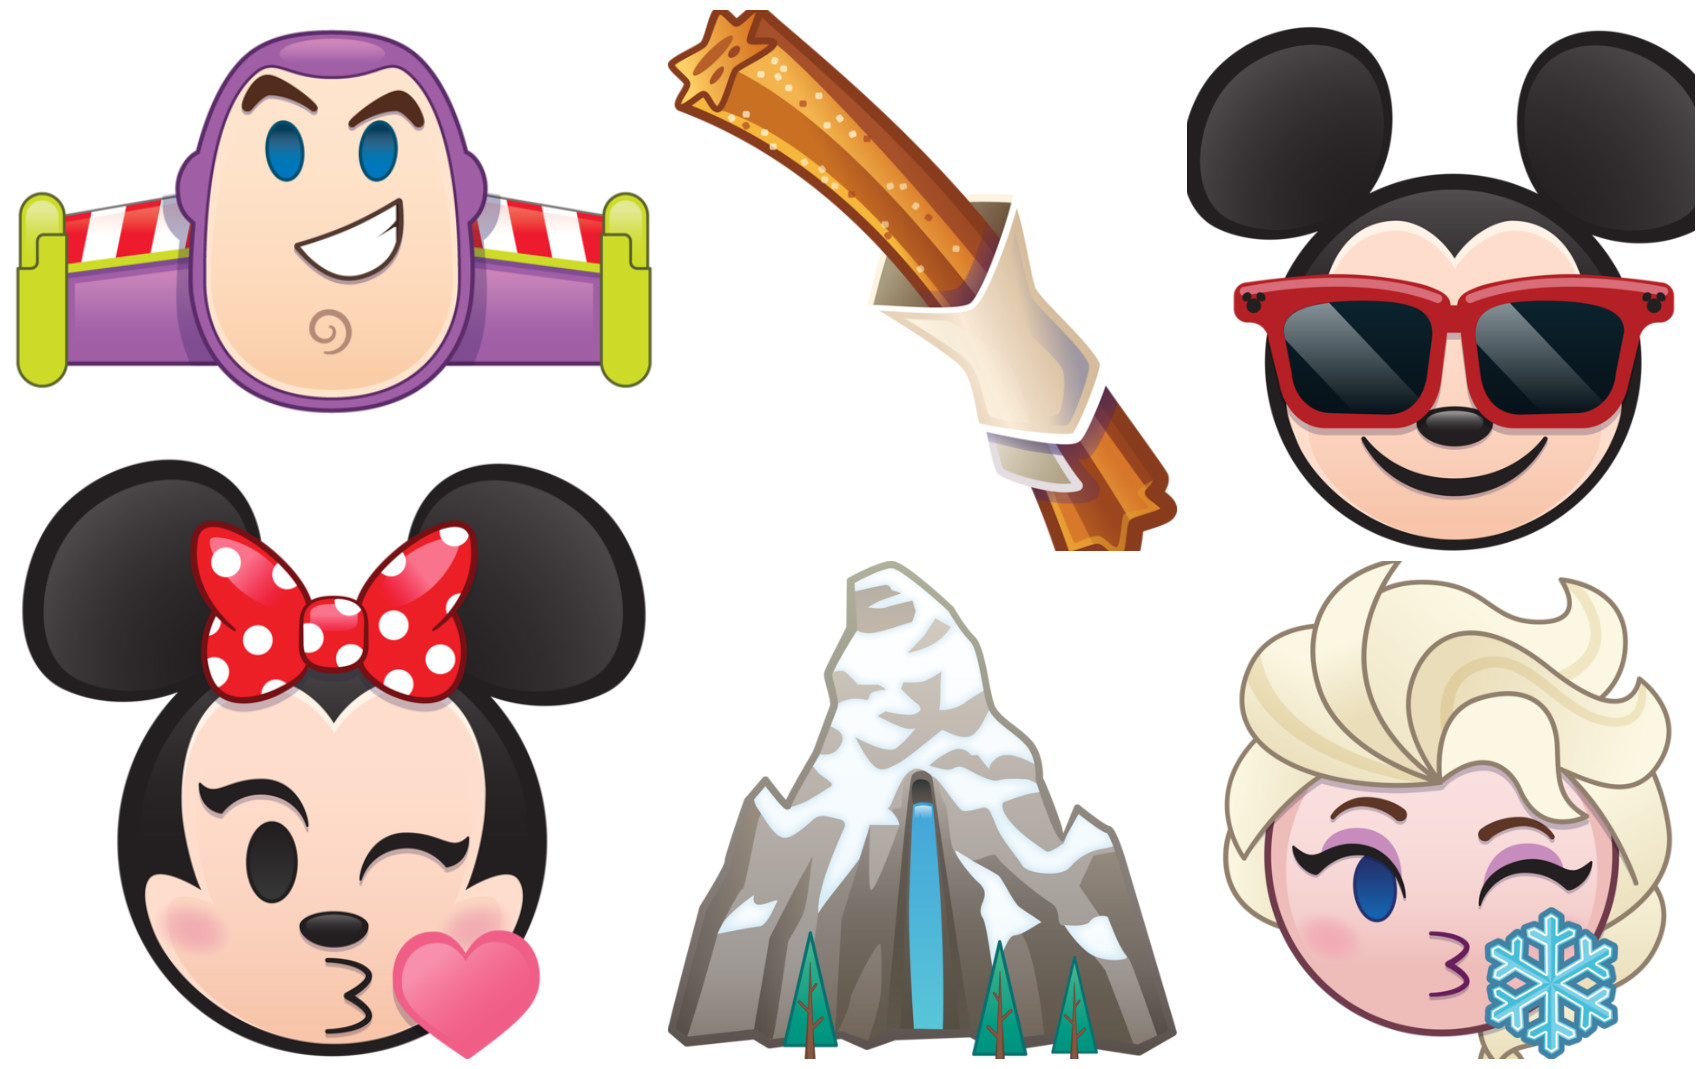 Can you use Disney Emojis in text?